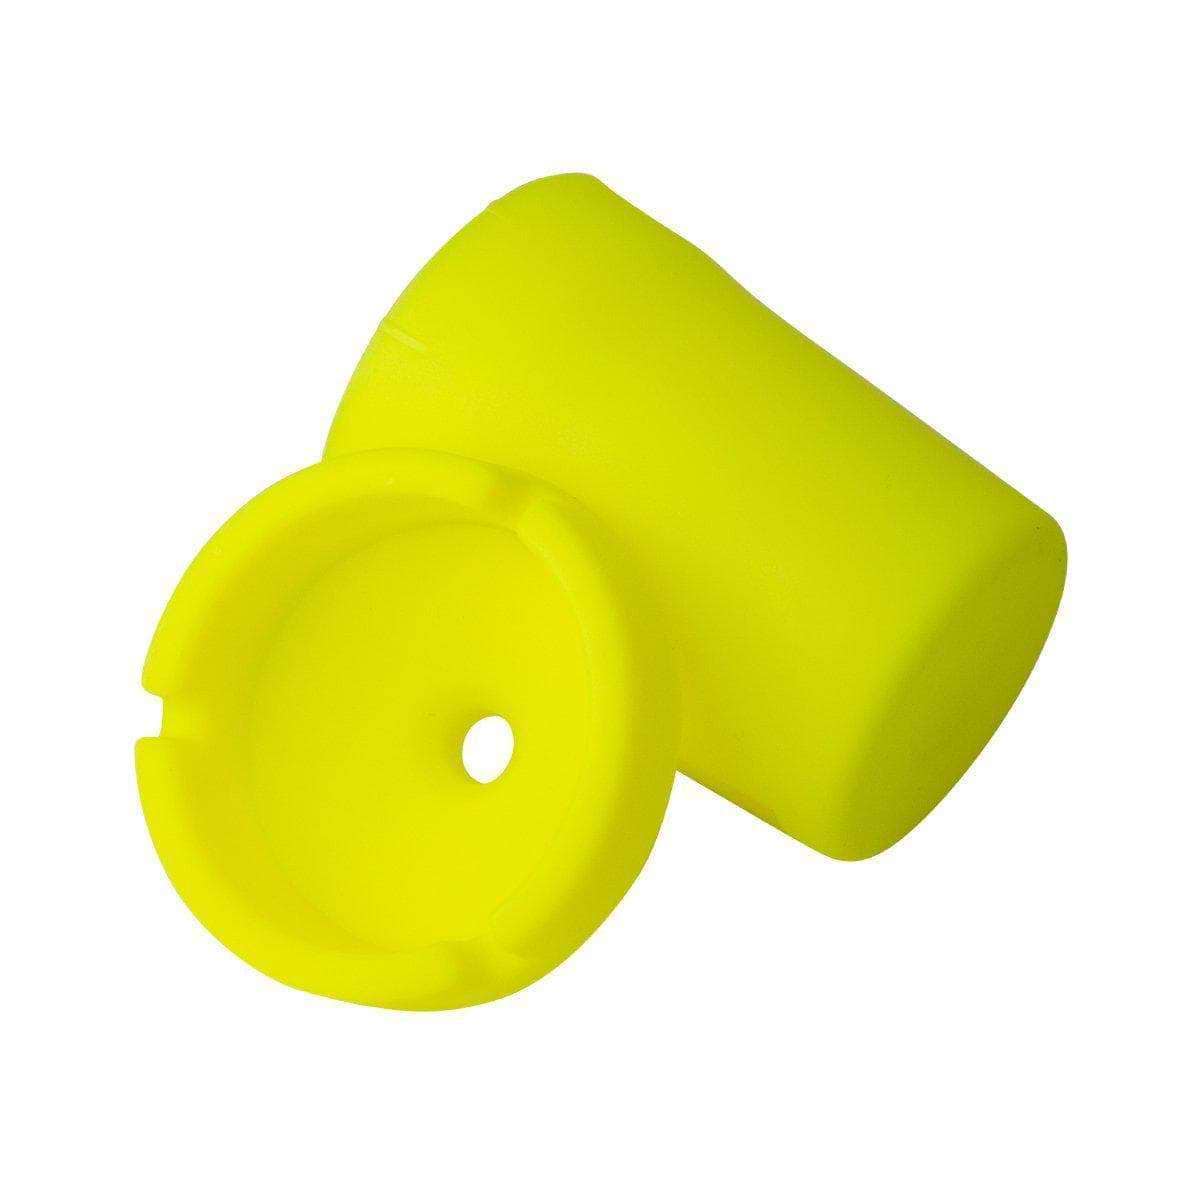 Opened fun silicone ashtray smoking accessories in yellow color and pail bucket shape design and look